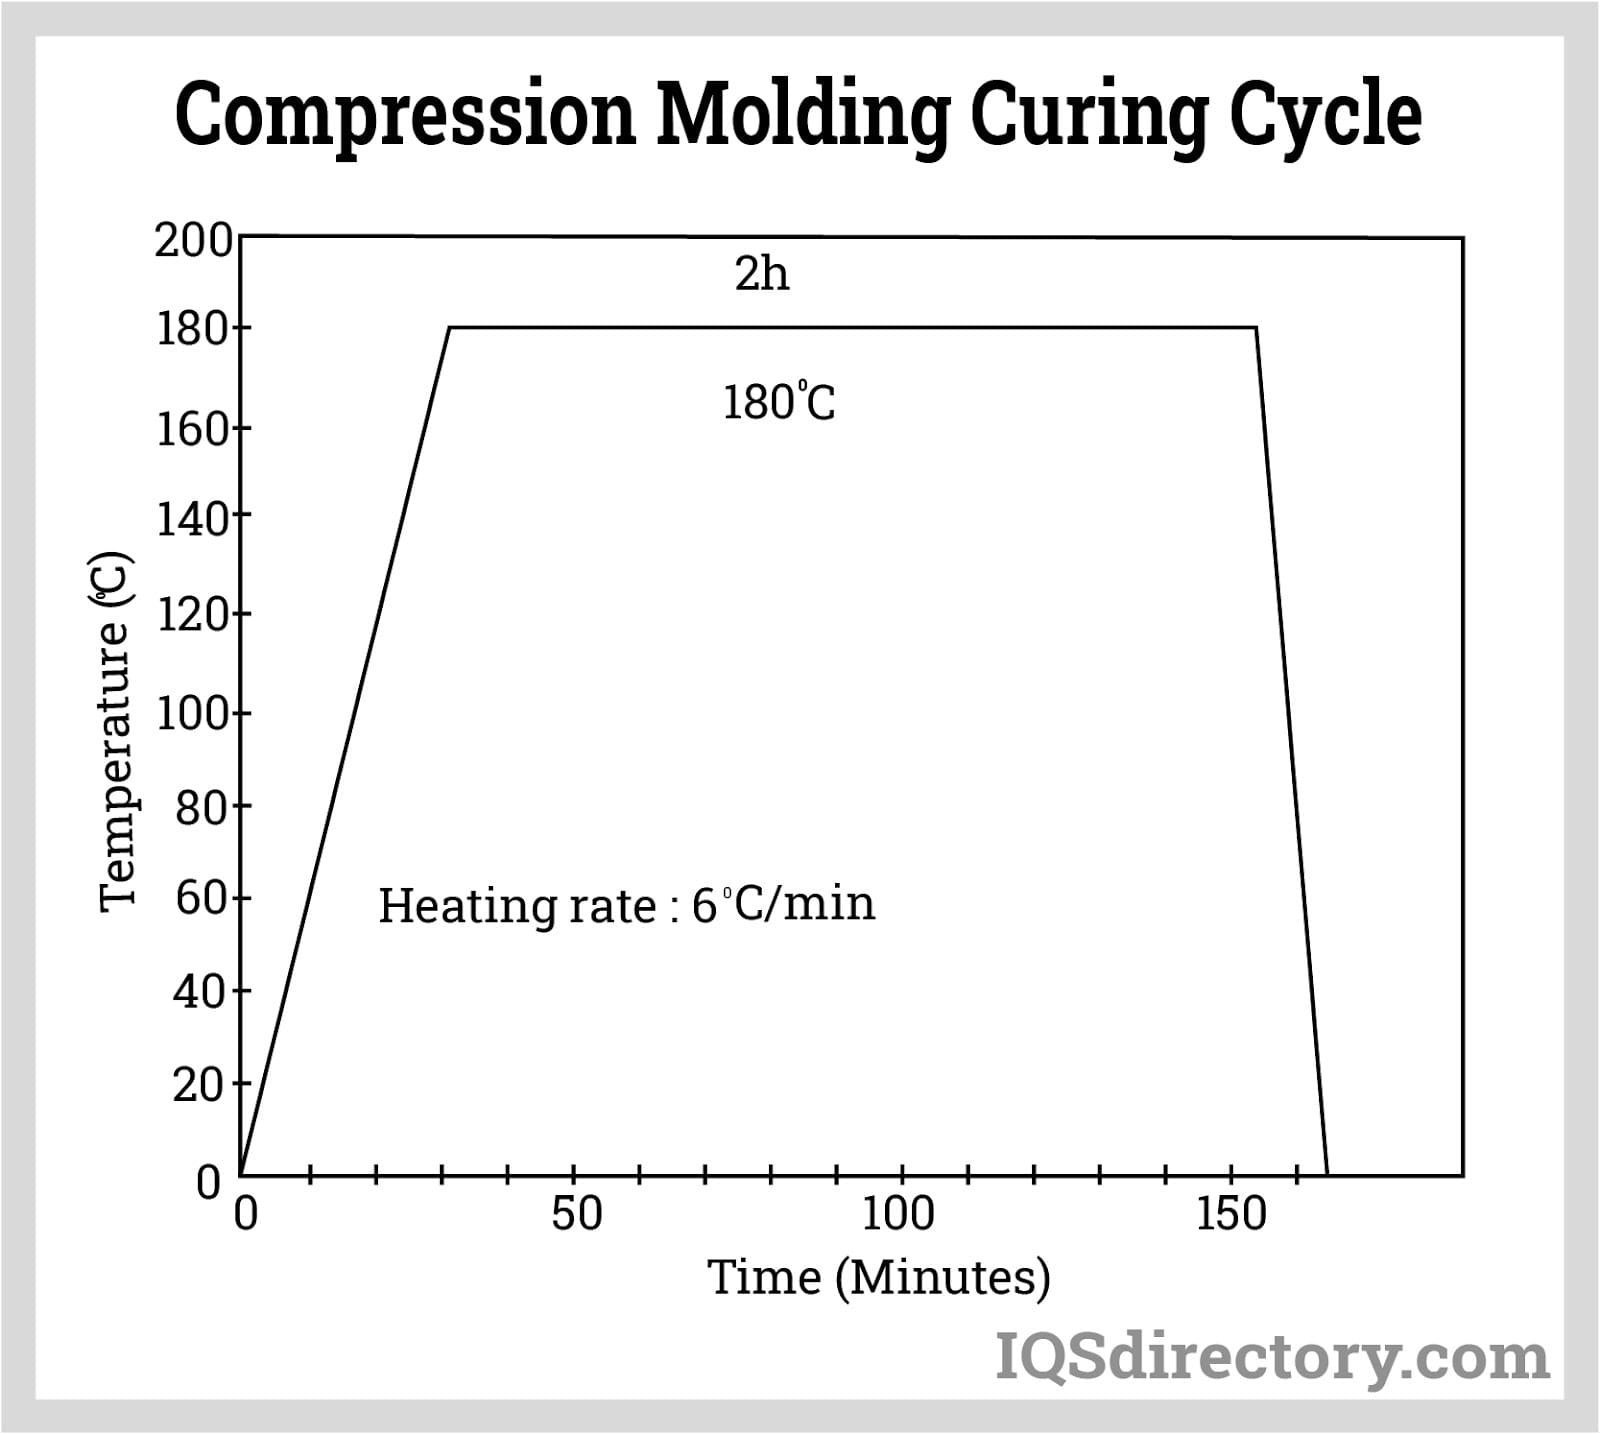 Compression Molding Curing Cycle